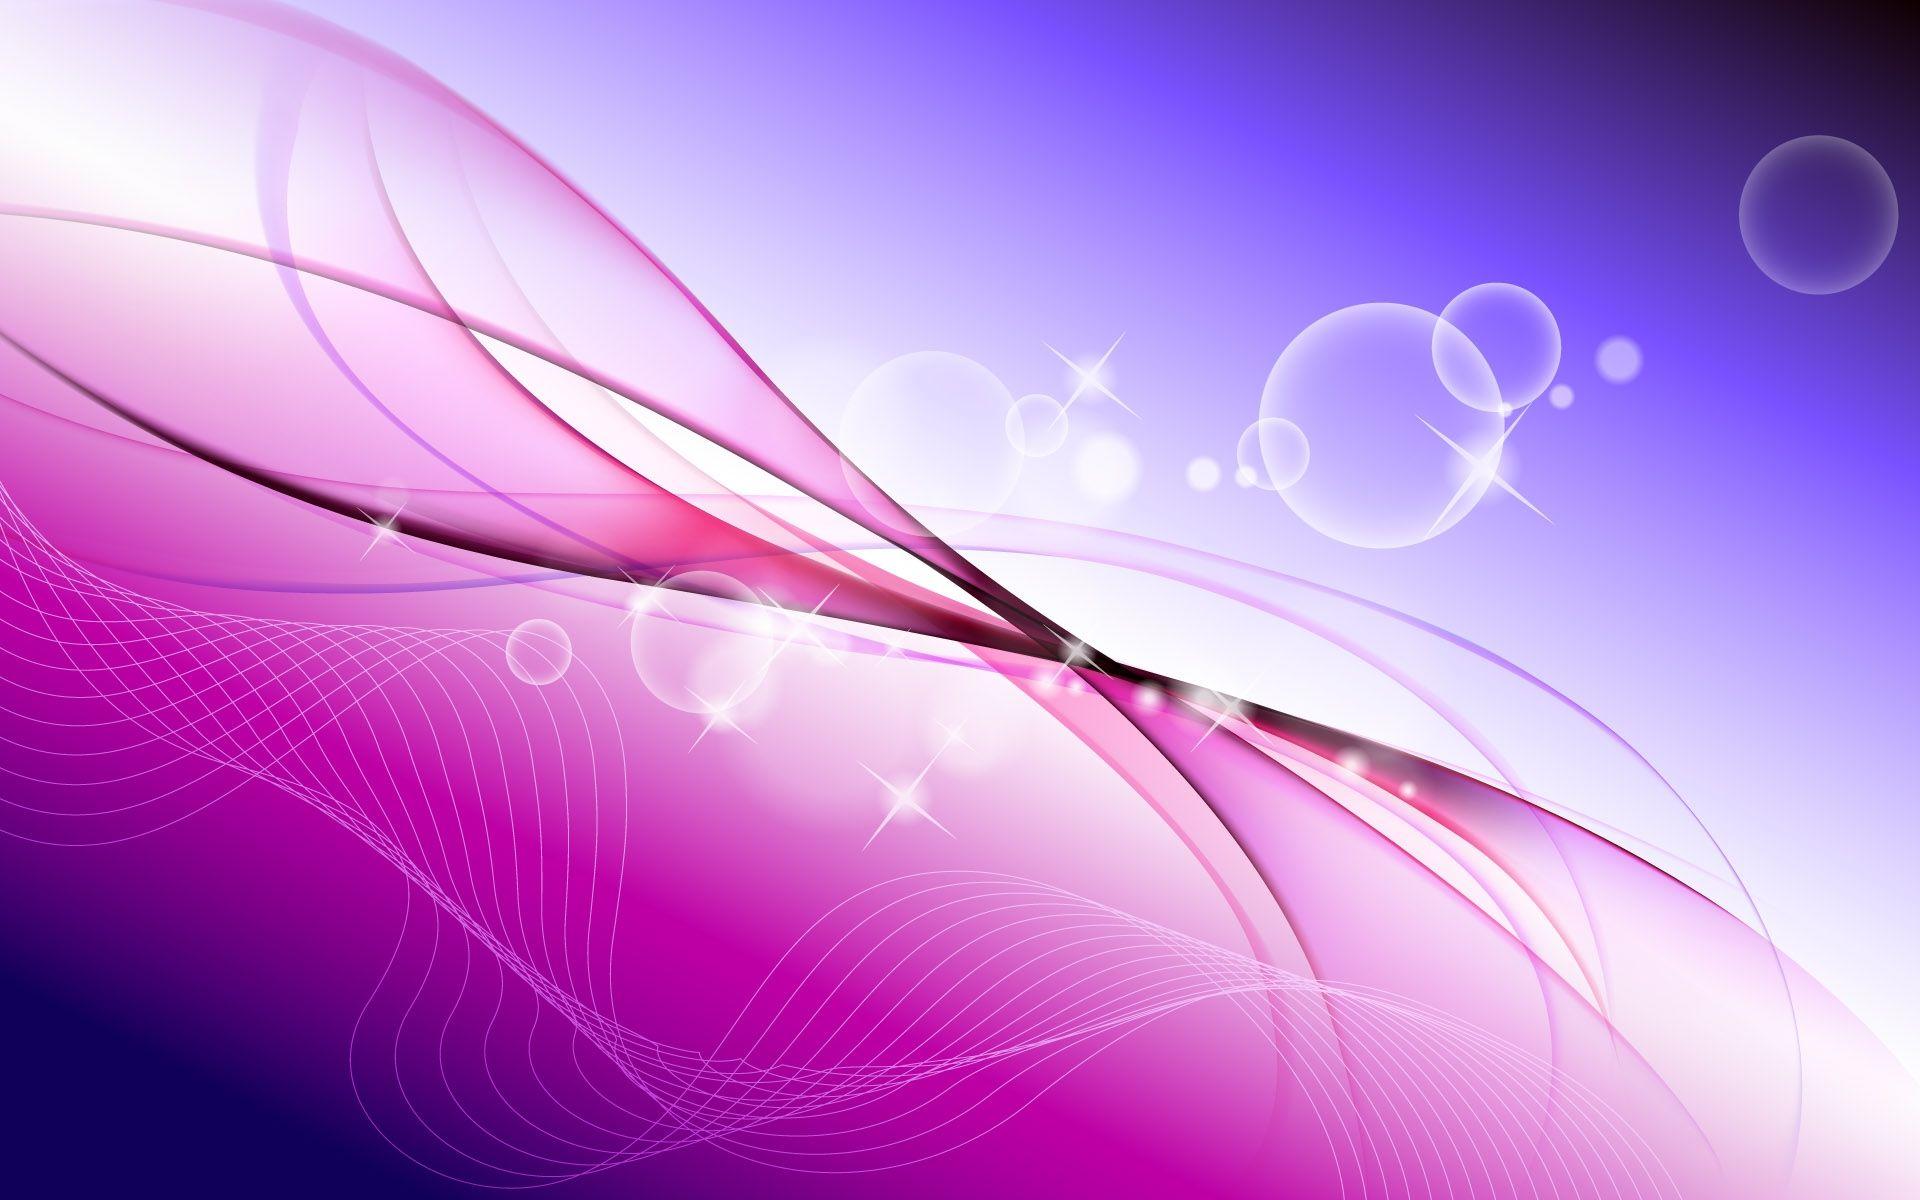 Abstract Light Purple Background Hd / Download, share or upload your own one! - Shinu Wallpaper